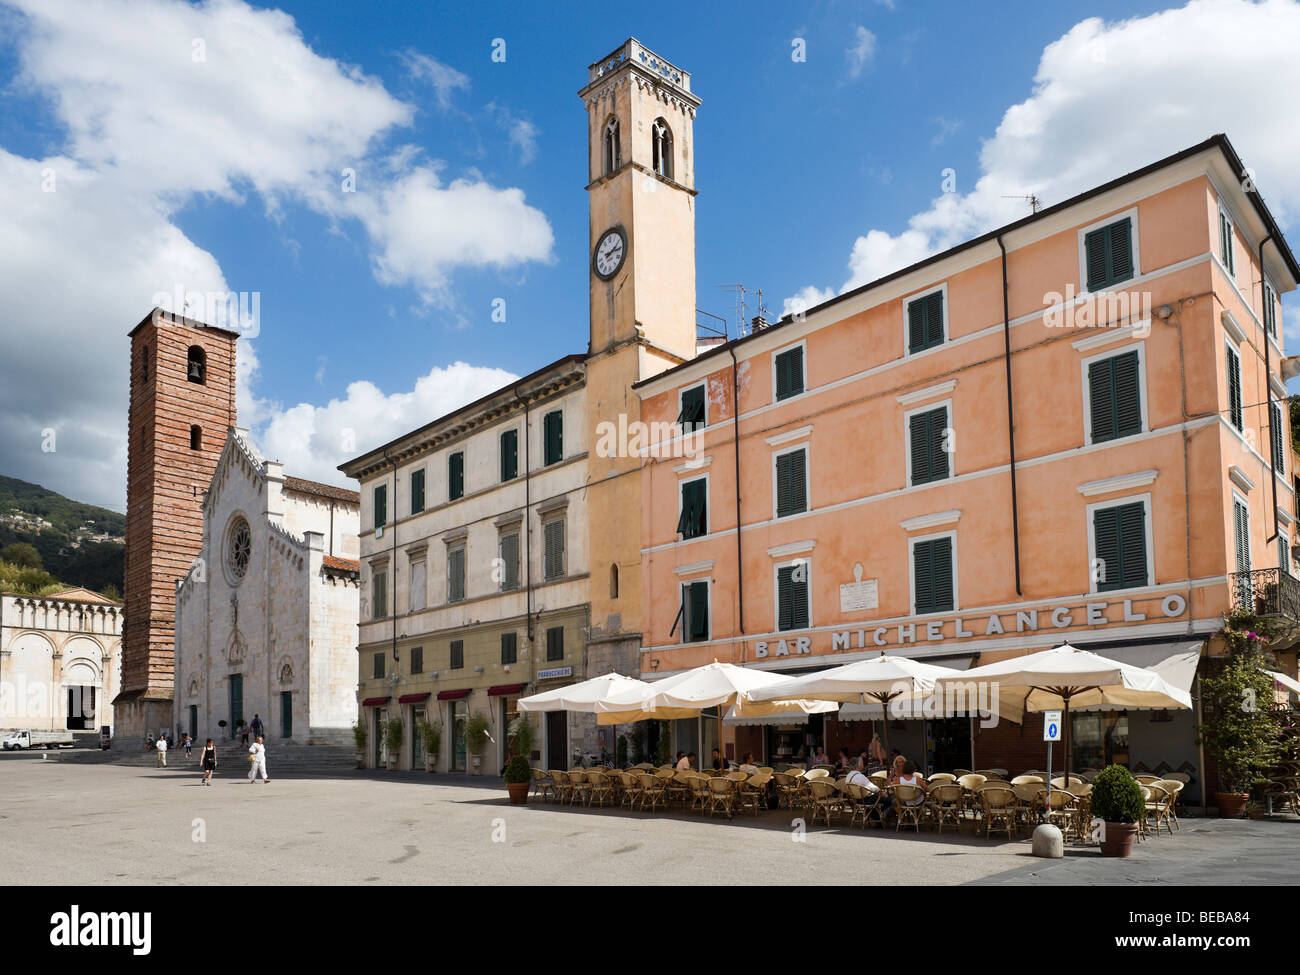 Cafe in the Piazza del Duomo with the Duomo behind, Pietrasanta, Tuscan Riviera, Tuscany, Italy Stock Photo